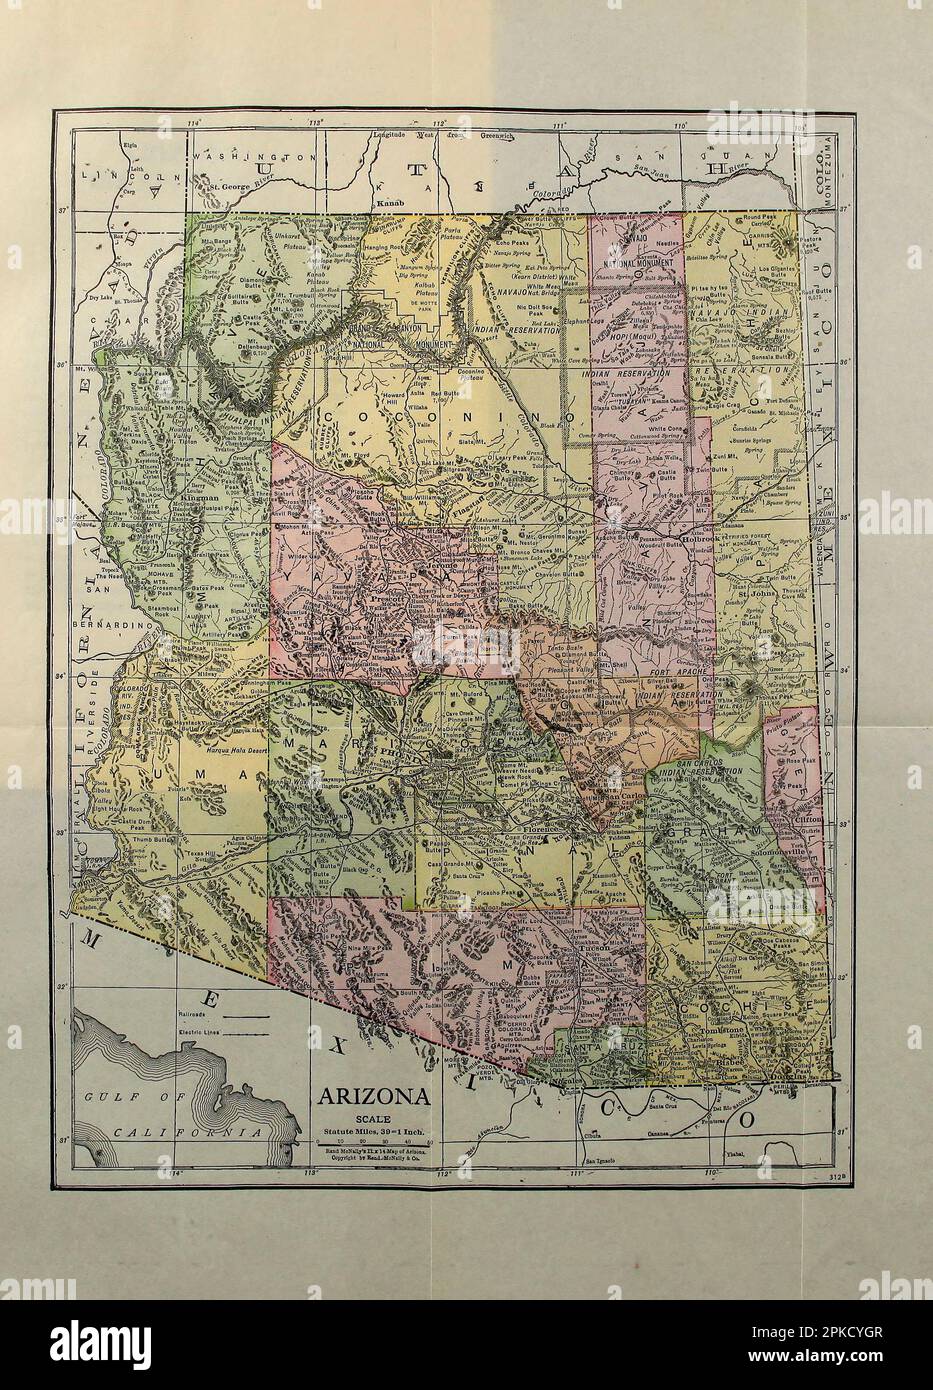 Map of Arizona 1917 from the book ' Arizona, the wonderland ' the history of its ancient cliff and cave dwellings, ruined pueblos, conquest by the Spaniards, Jesuit and Franciscan missions, trail makers and Indians; a survey of its climate, scenic marvels, topography, deserts, mountains, rivers and valleys; a review of its industries; an account of its influence on art, literature and science; and some reference to what it offers of delight to the automobilist, sportsman, pleasure and health seeker. By George Wharton James. Published in Boston by the Page company 1917 part of the See America F Stock Photo